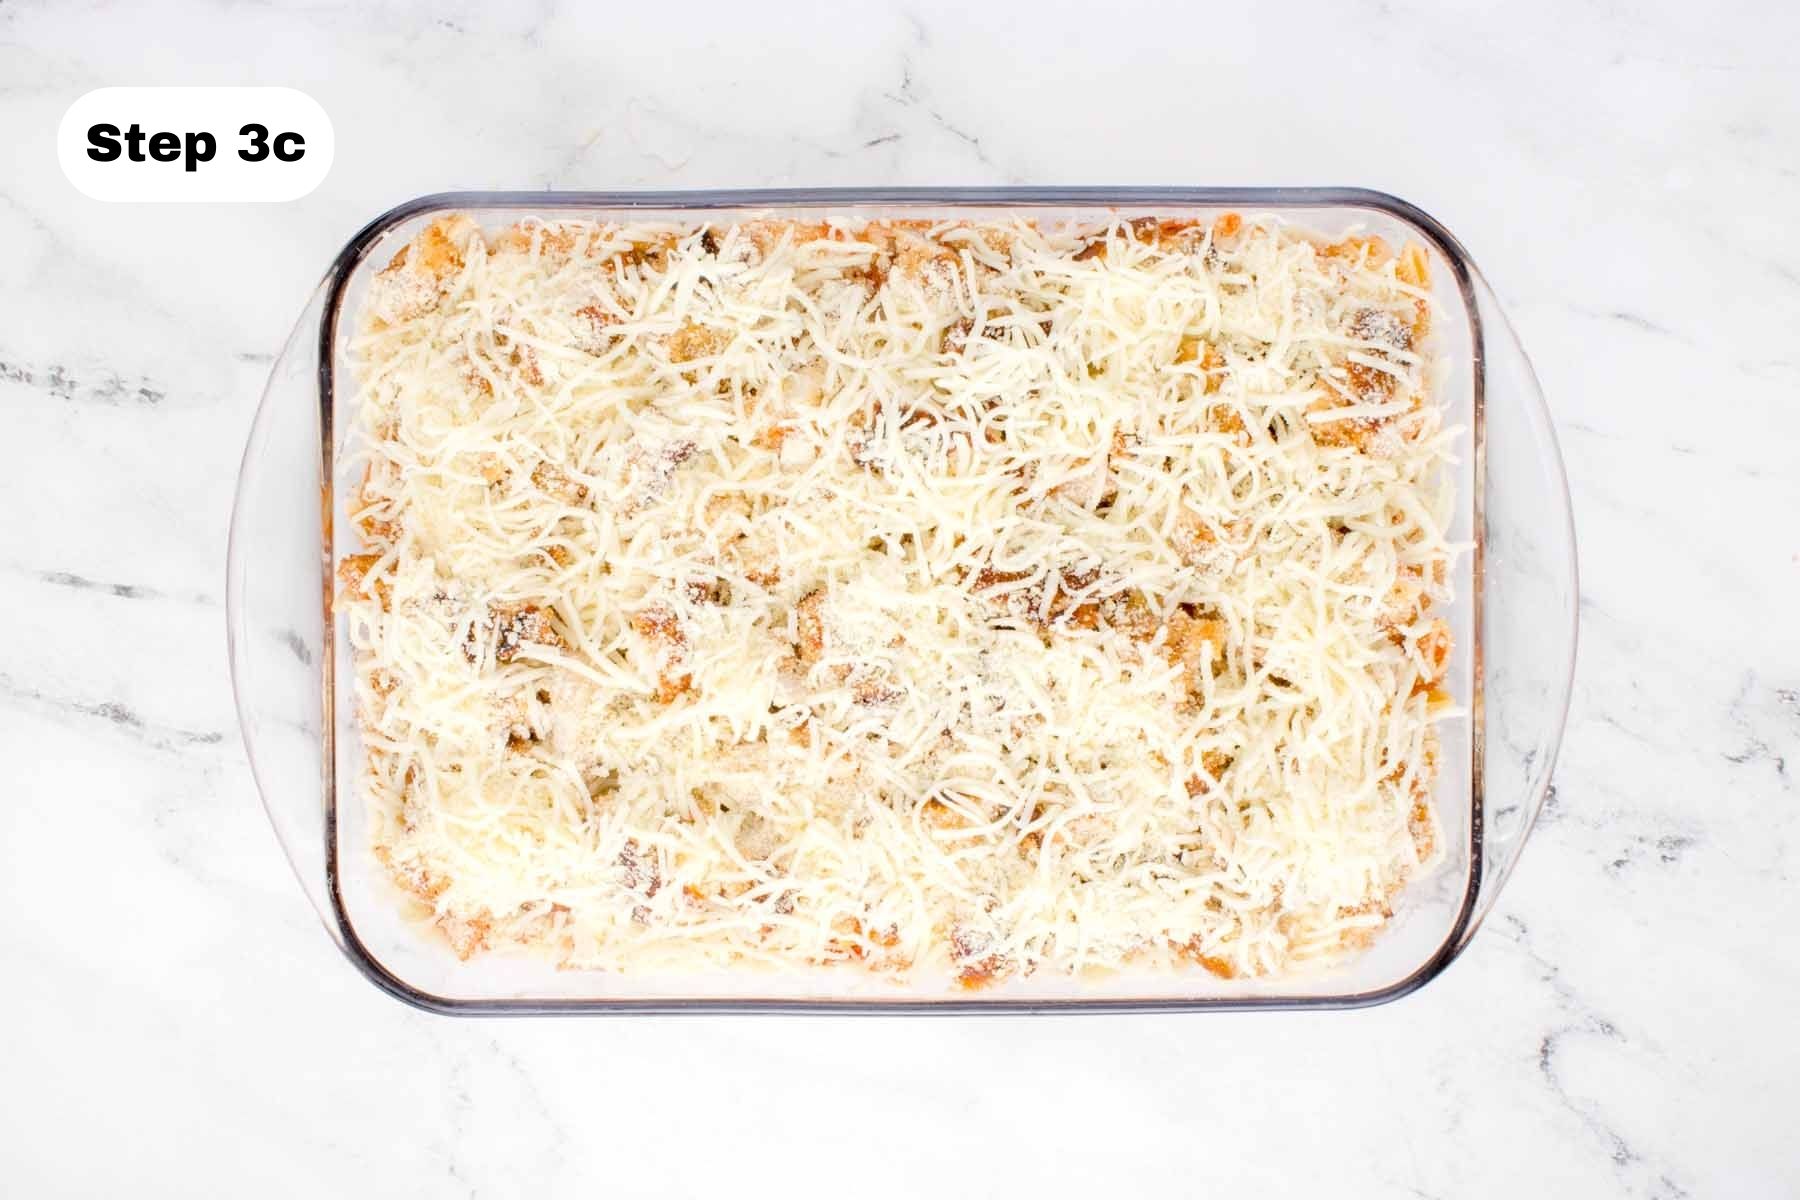 Shredded mozzarella and Parmesan layered on top of cooked chicken thigh pieces in a glass baking dish.